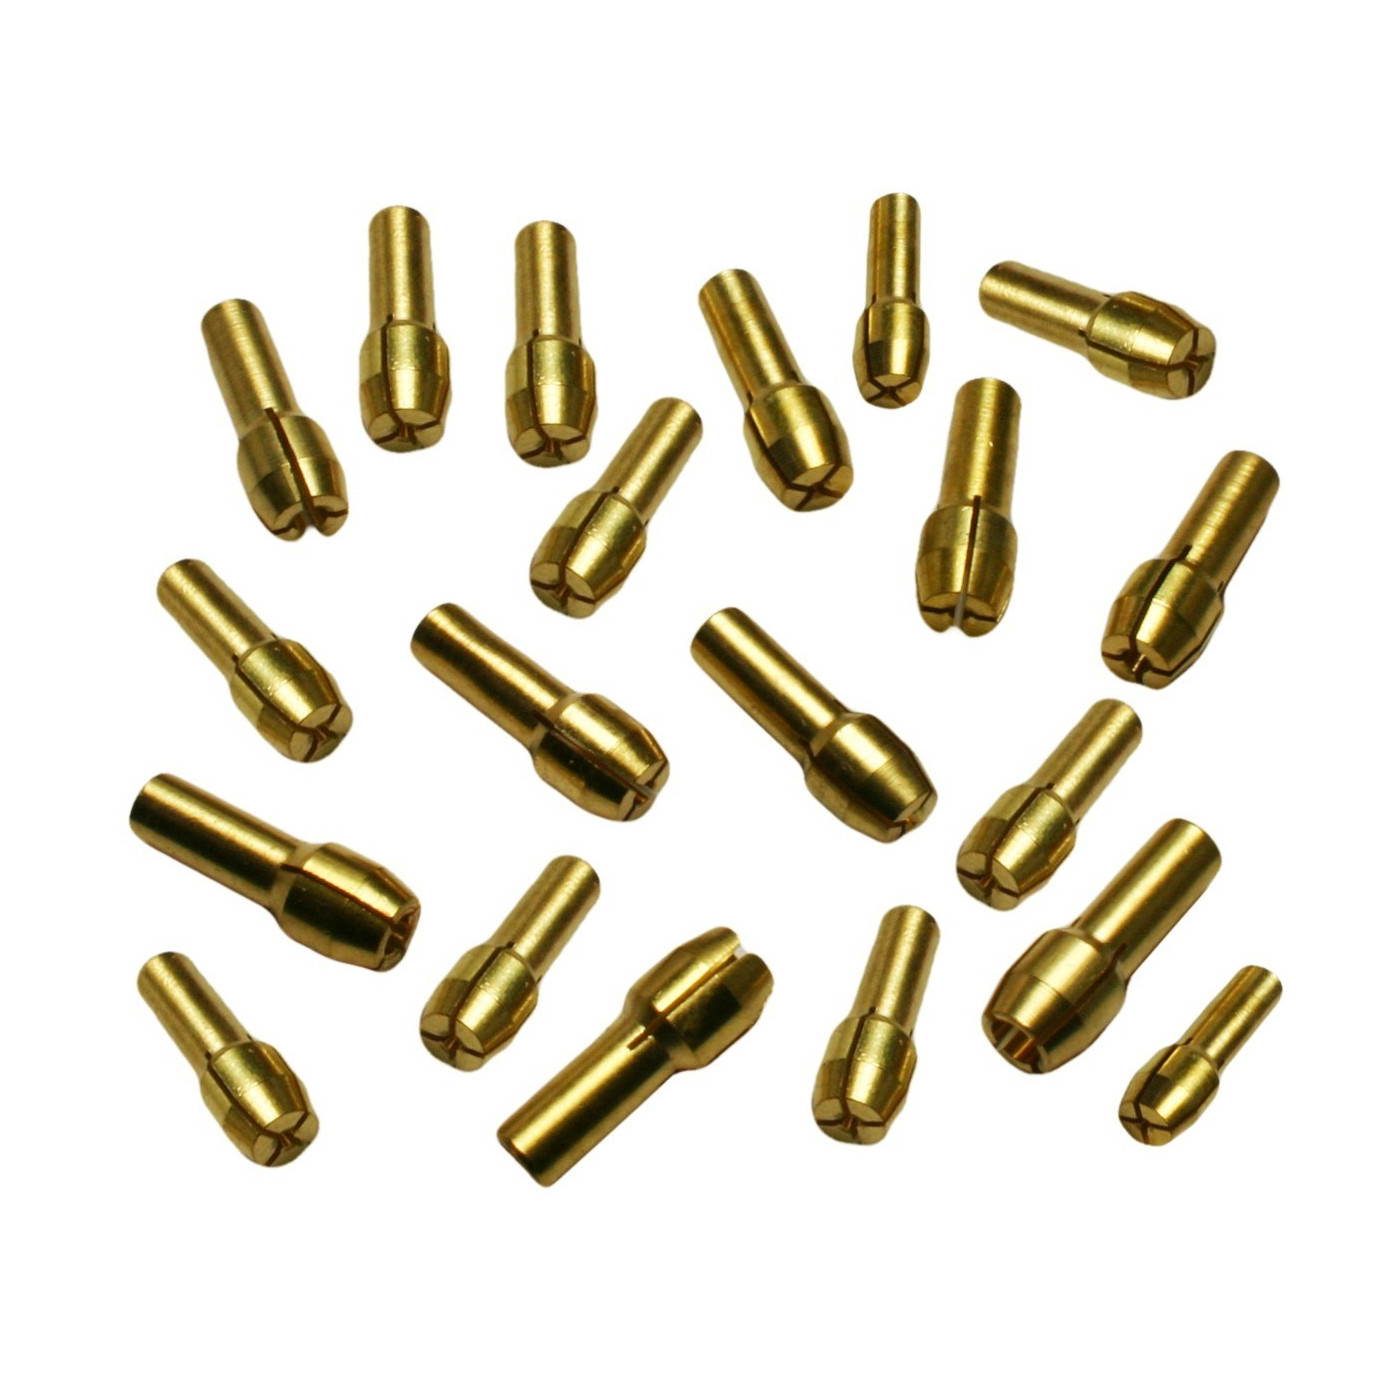 Details about   sale 8Pcs Drill Chucks Collet Bits Brass Fit Rotary Tools 1mm/1.6mm/2.3mm/3.2mm 